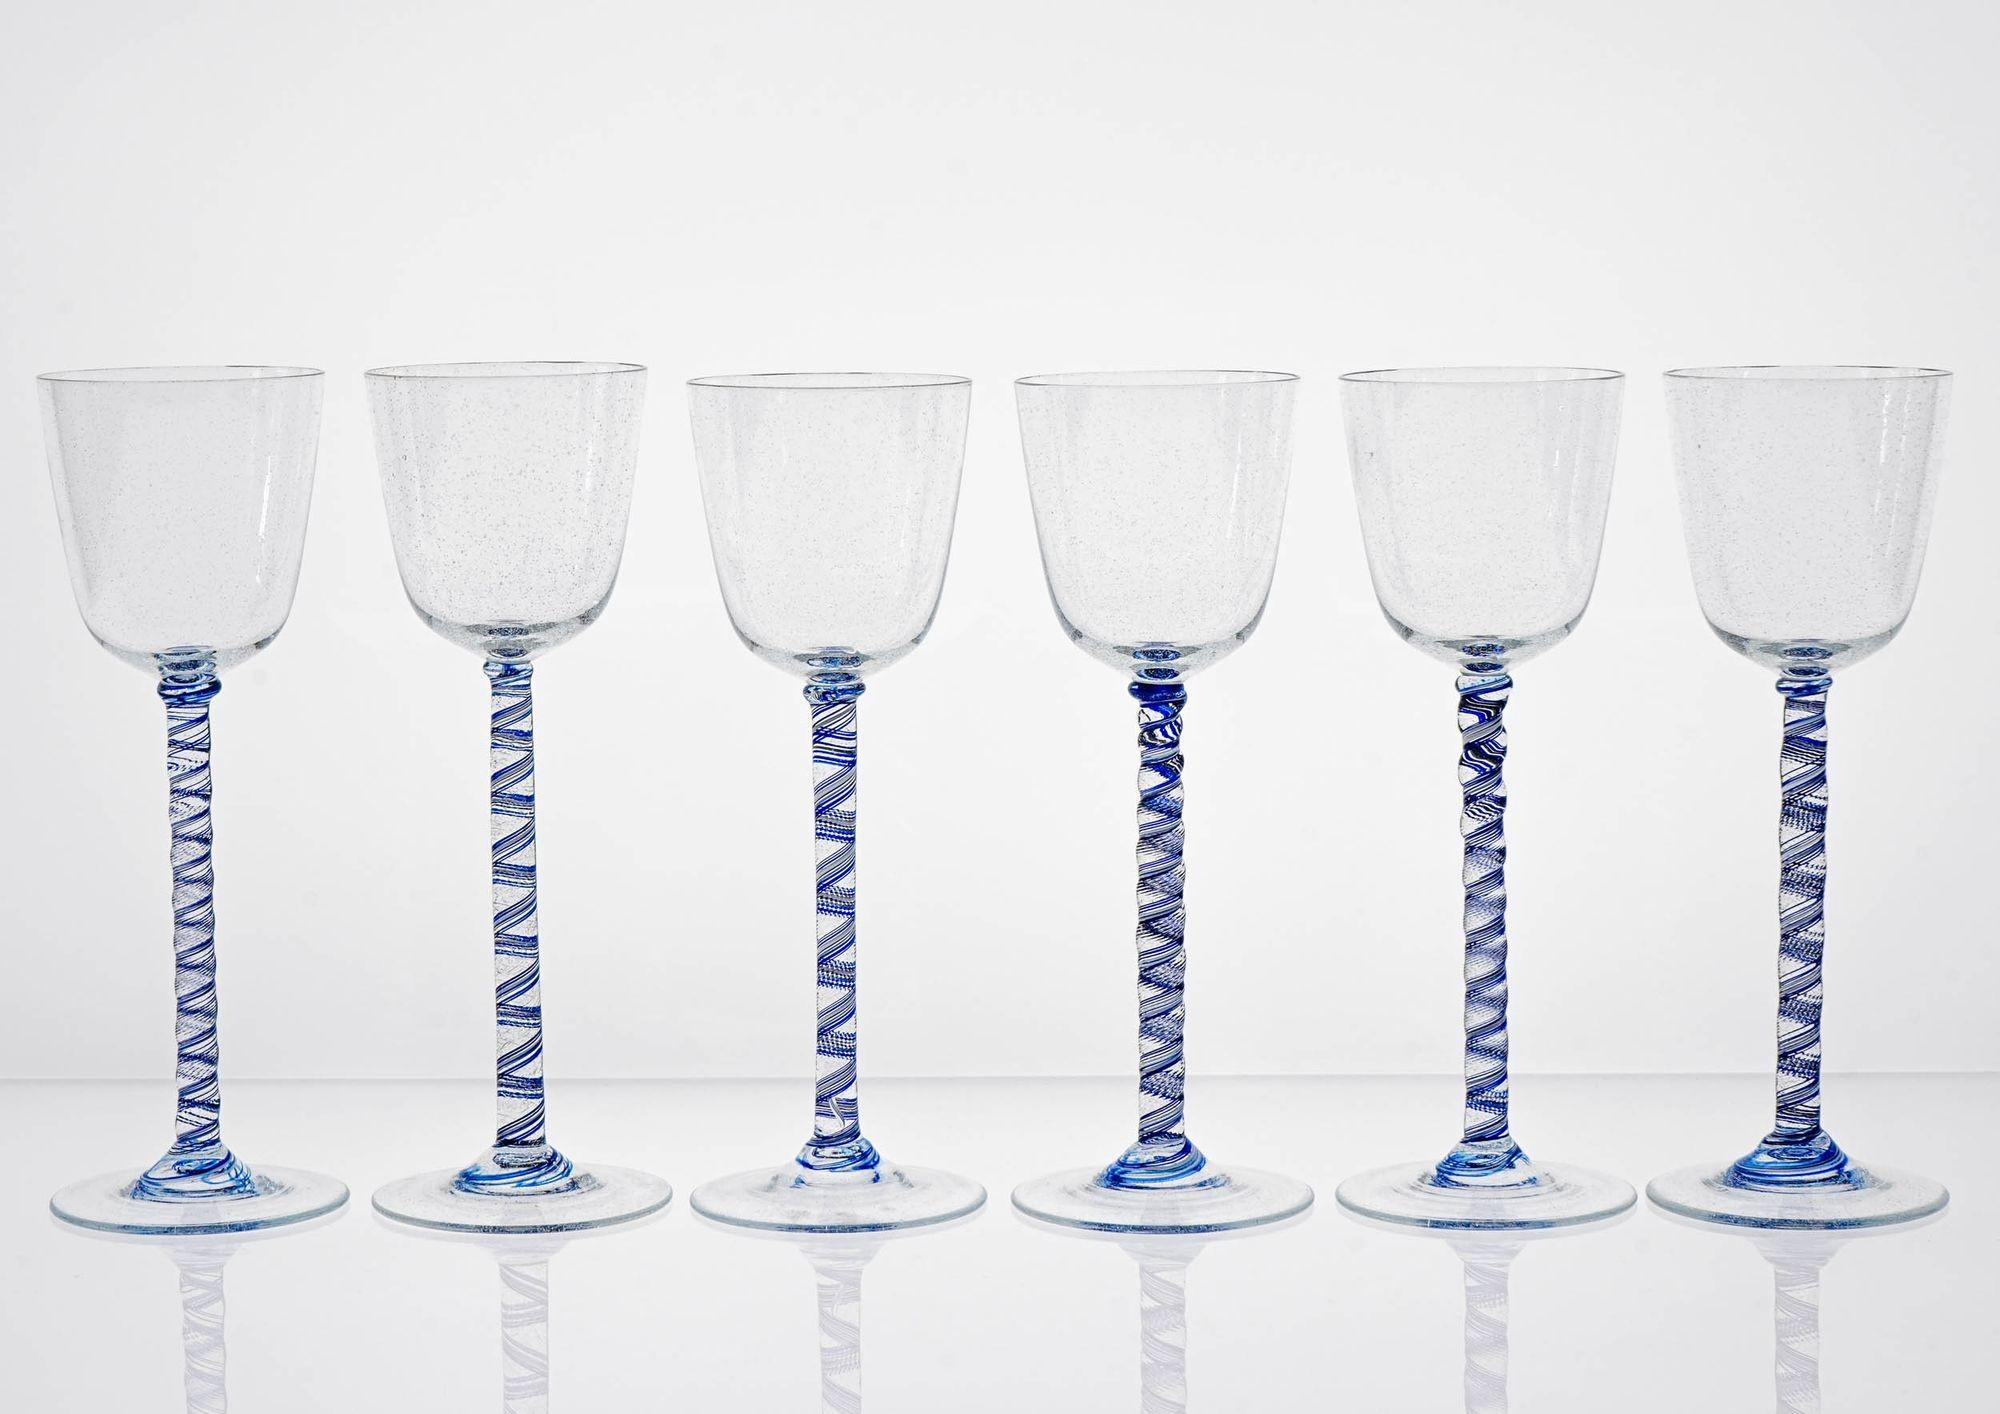 Own a rare and exceptional set of Cenedese stem glass
This unrepeatable set of stemware reproduces the Georgian 18th Century classic twisted stem glass. The twisted stem is in Cobalt bead. In order re-create the antique soda glass appeareance, the